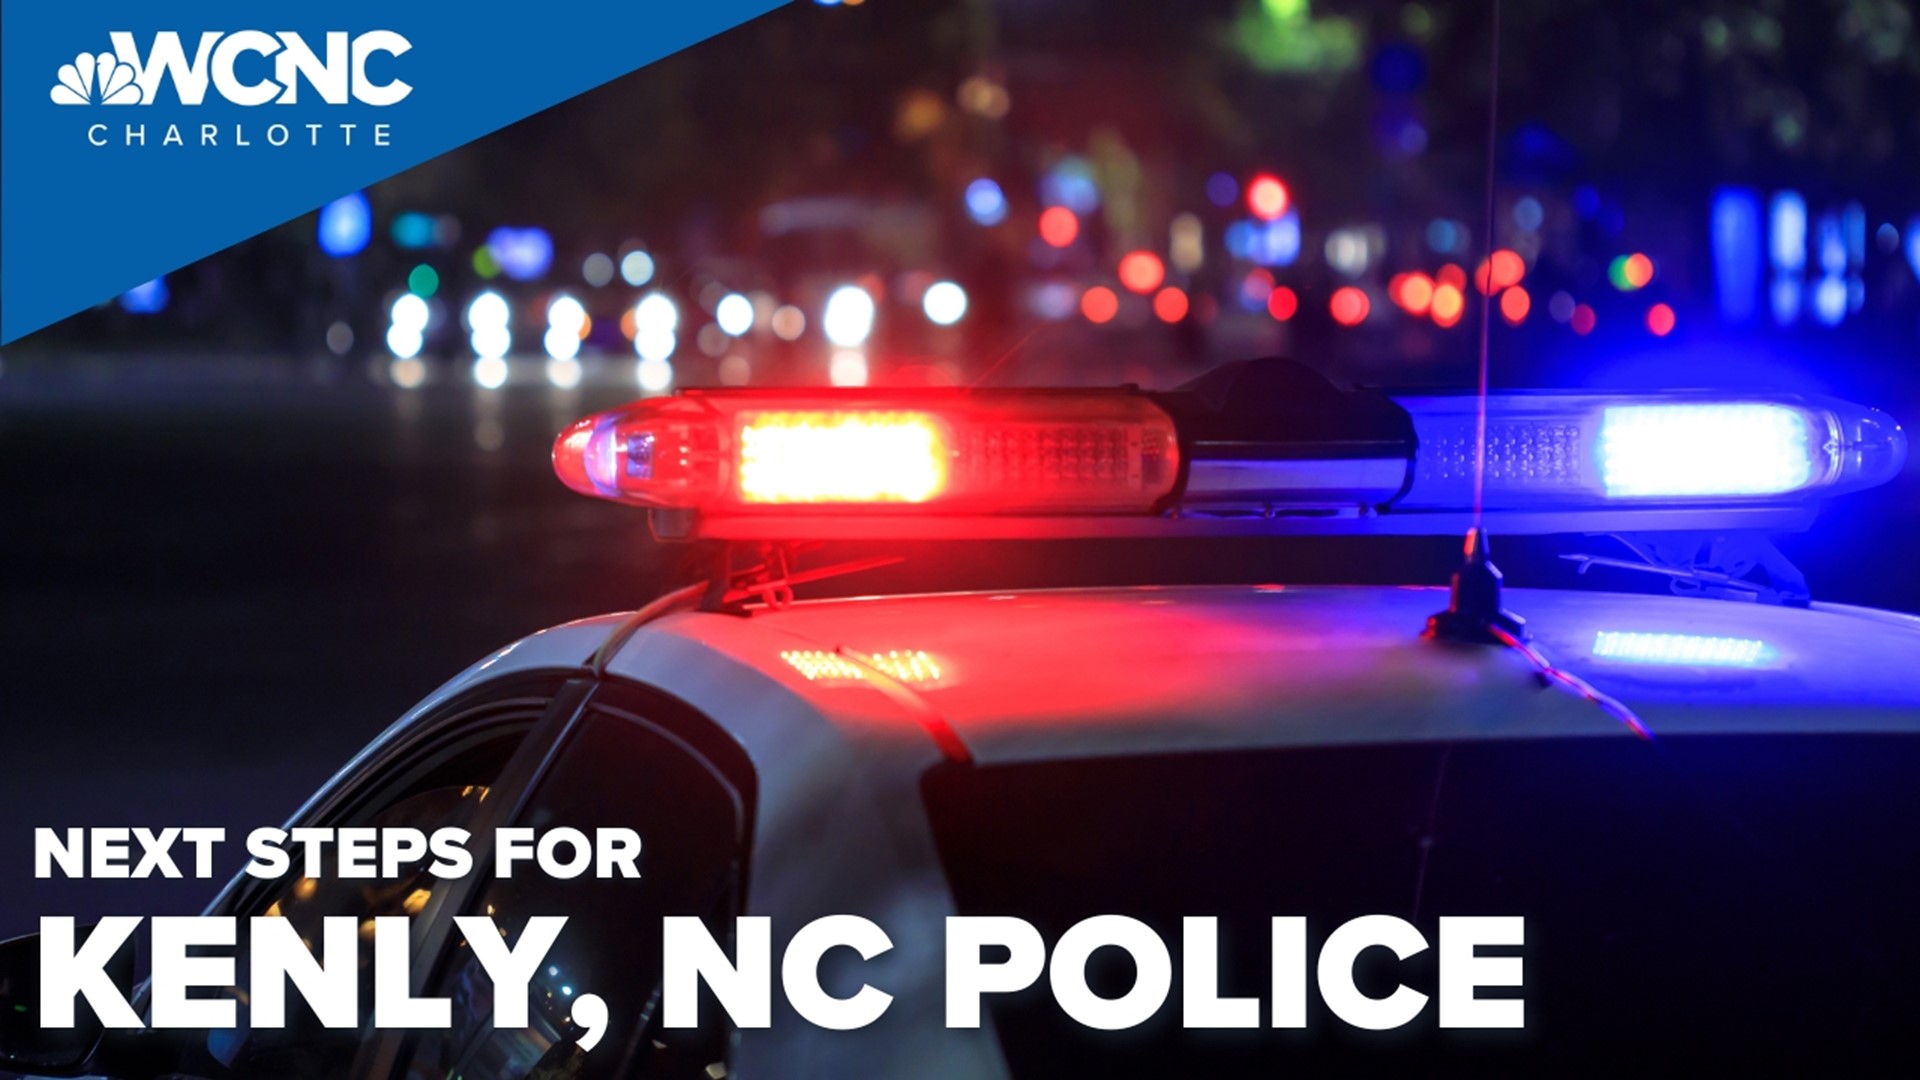 Kenly, North Carolina is working on how to move forward after all of its full time police officers resigned.